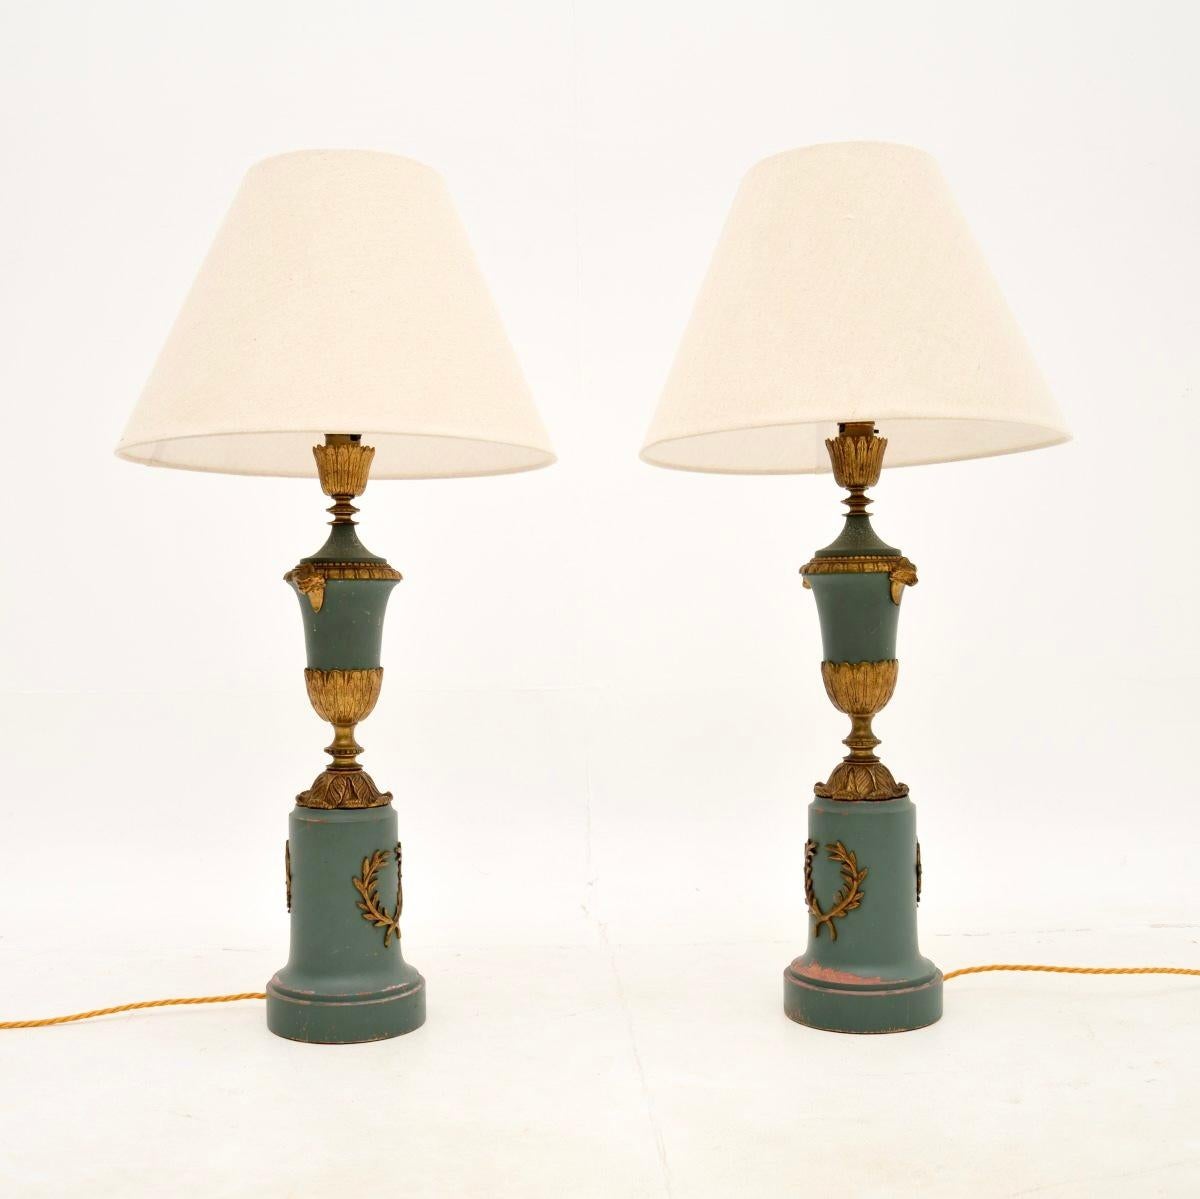 A lovely pair of antique French neo classical table lamps, dating from around the 1900-1920 period.

They are of great quality, the bases are turned solid wood, the upper urn shaped sections are metal and all are finished in a powder blue colour.